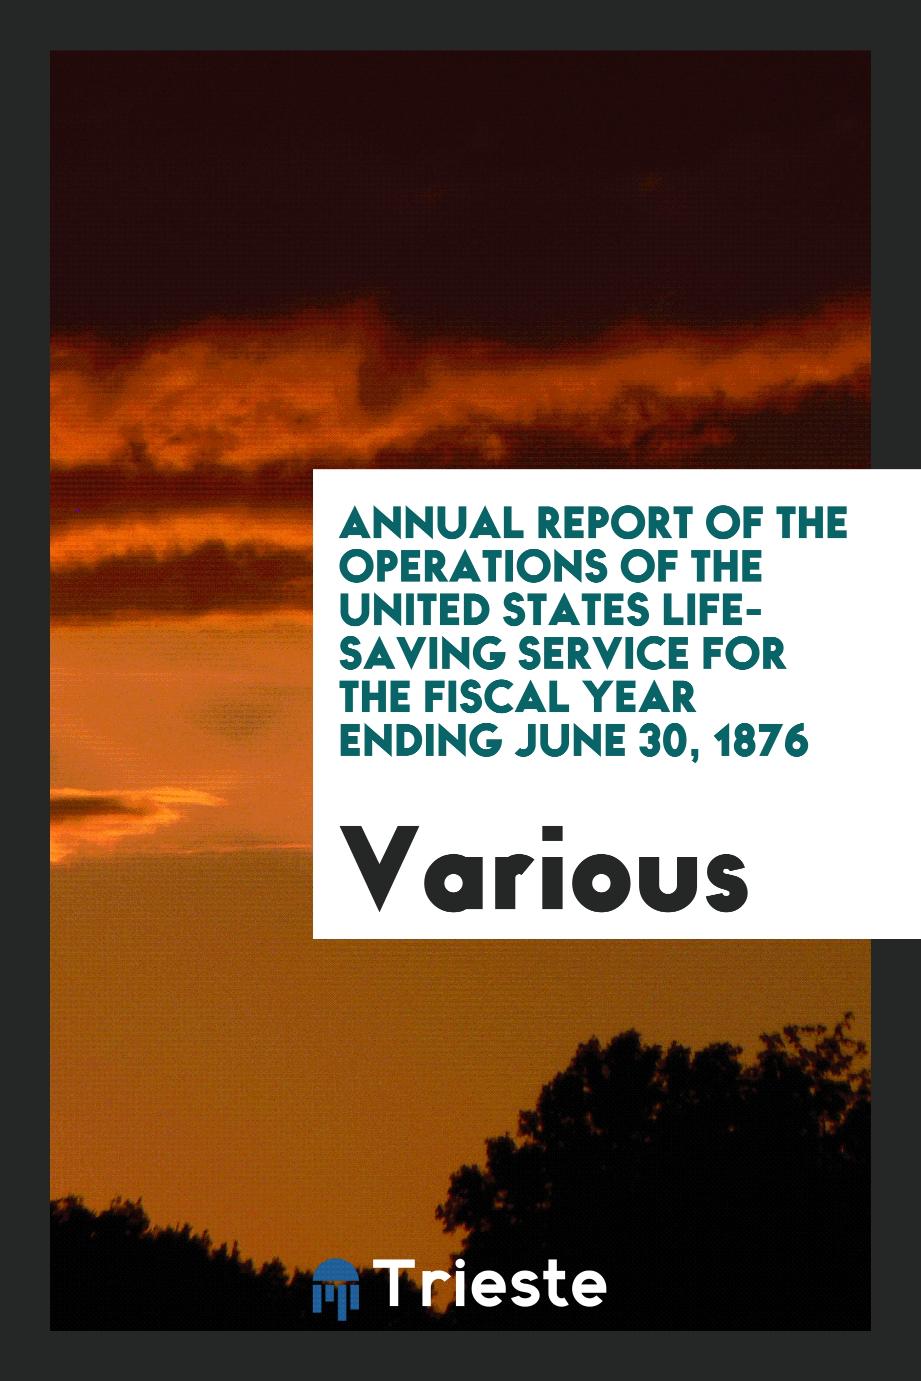 Annual Report of the Operations of the United States Life-Saving Service for the Fiscal Year Ending June 30, 1876